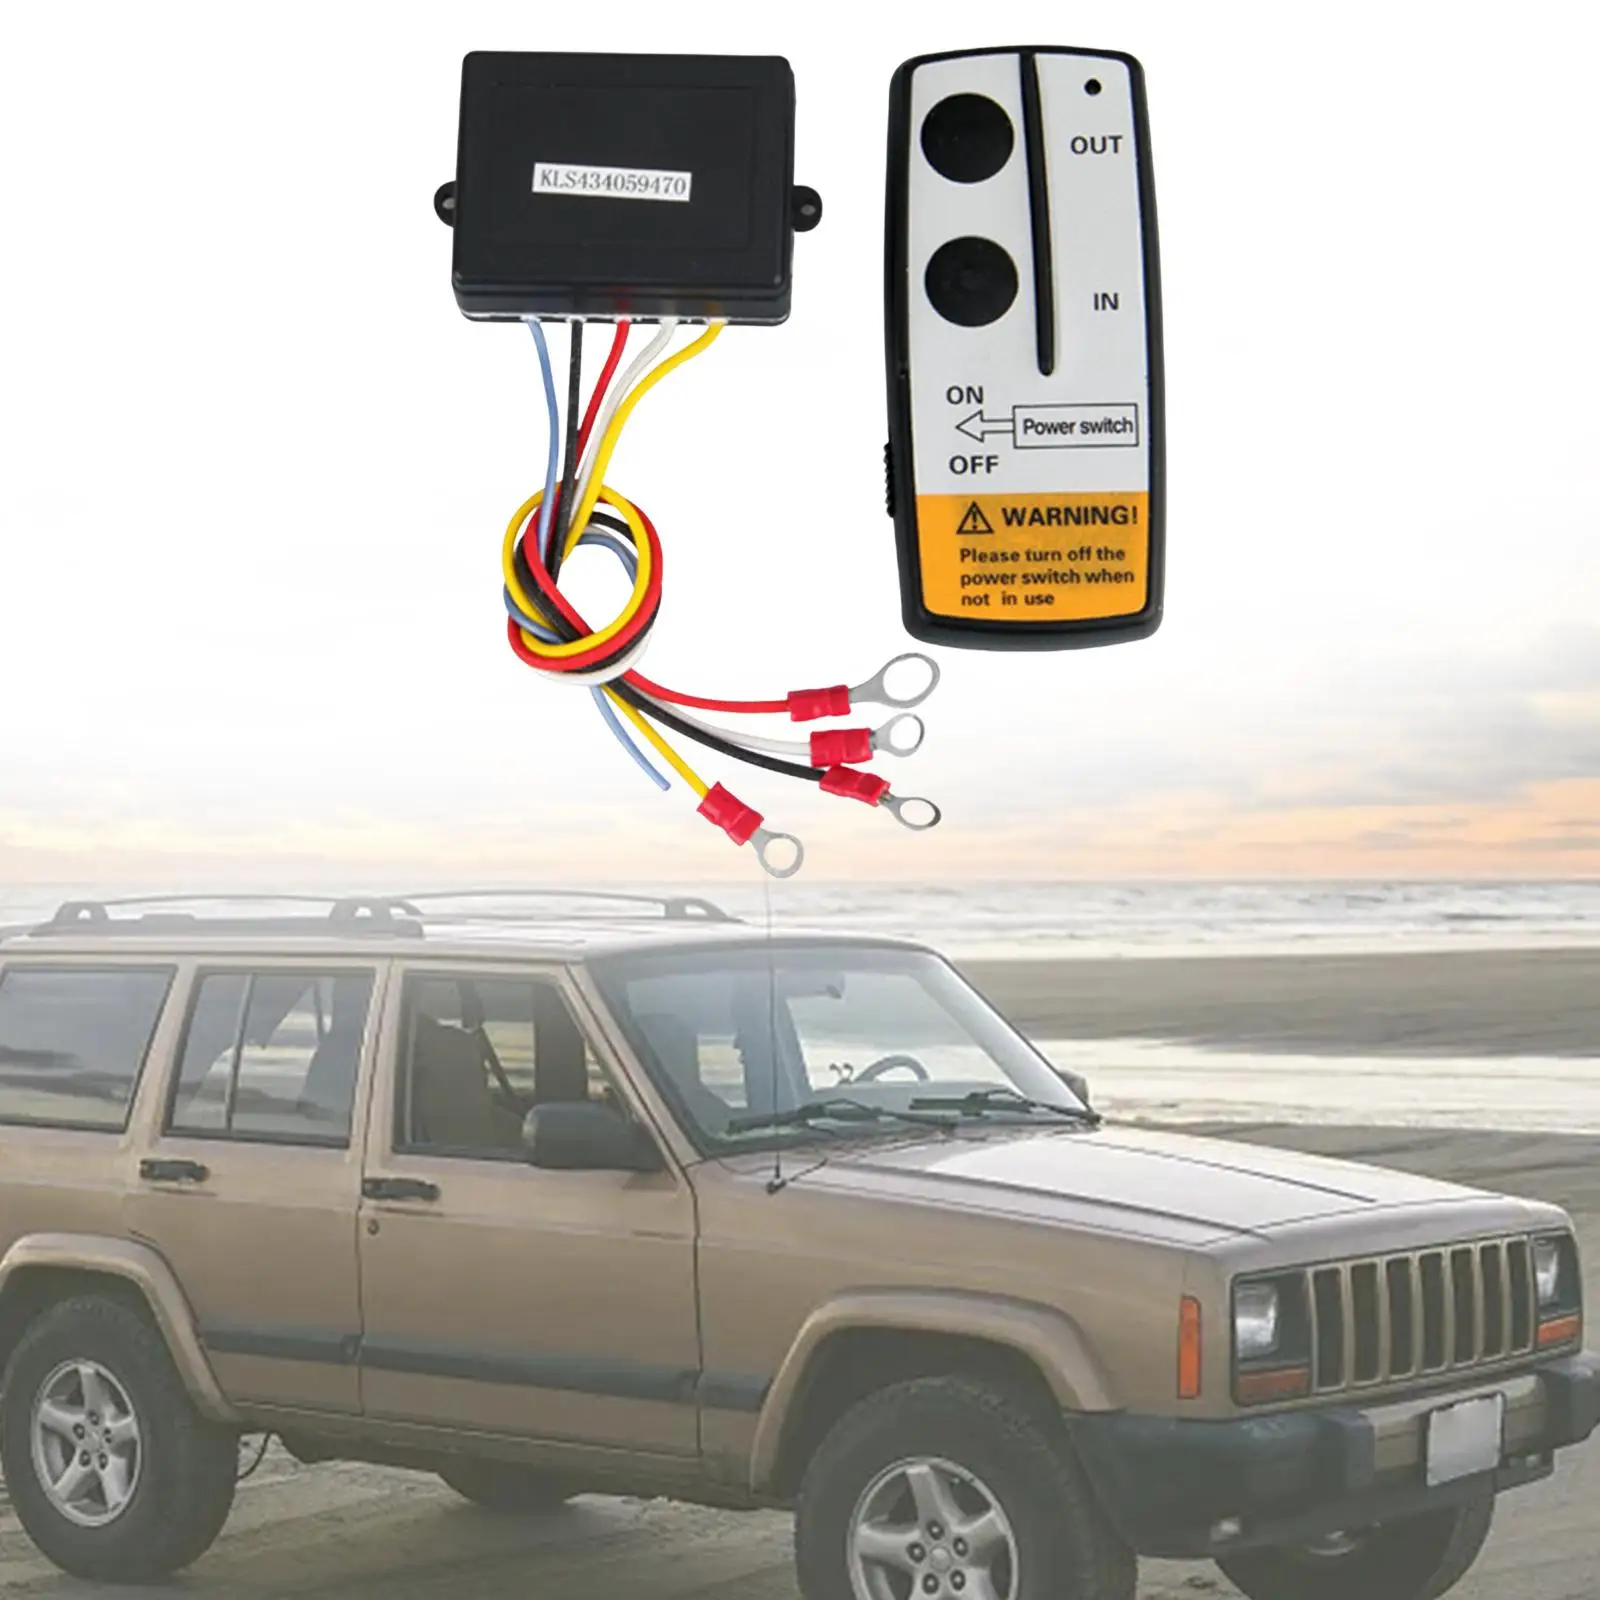 Winch Remote Control Kit High Performance 100Feet 12V Vehicle Accessory Handset